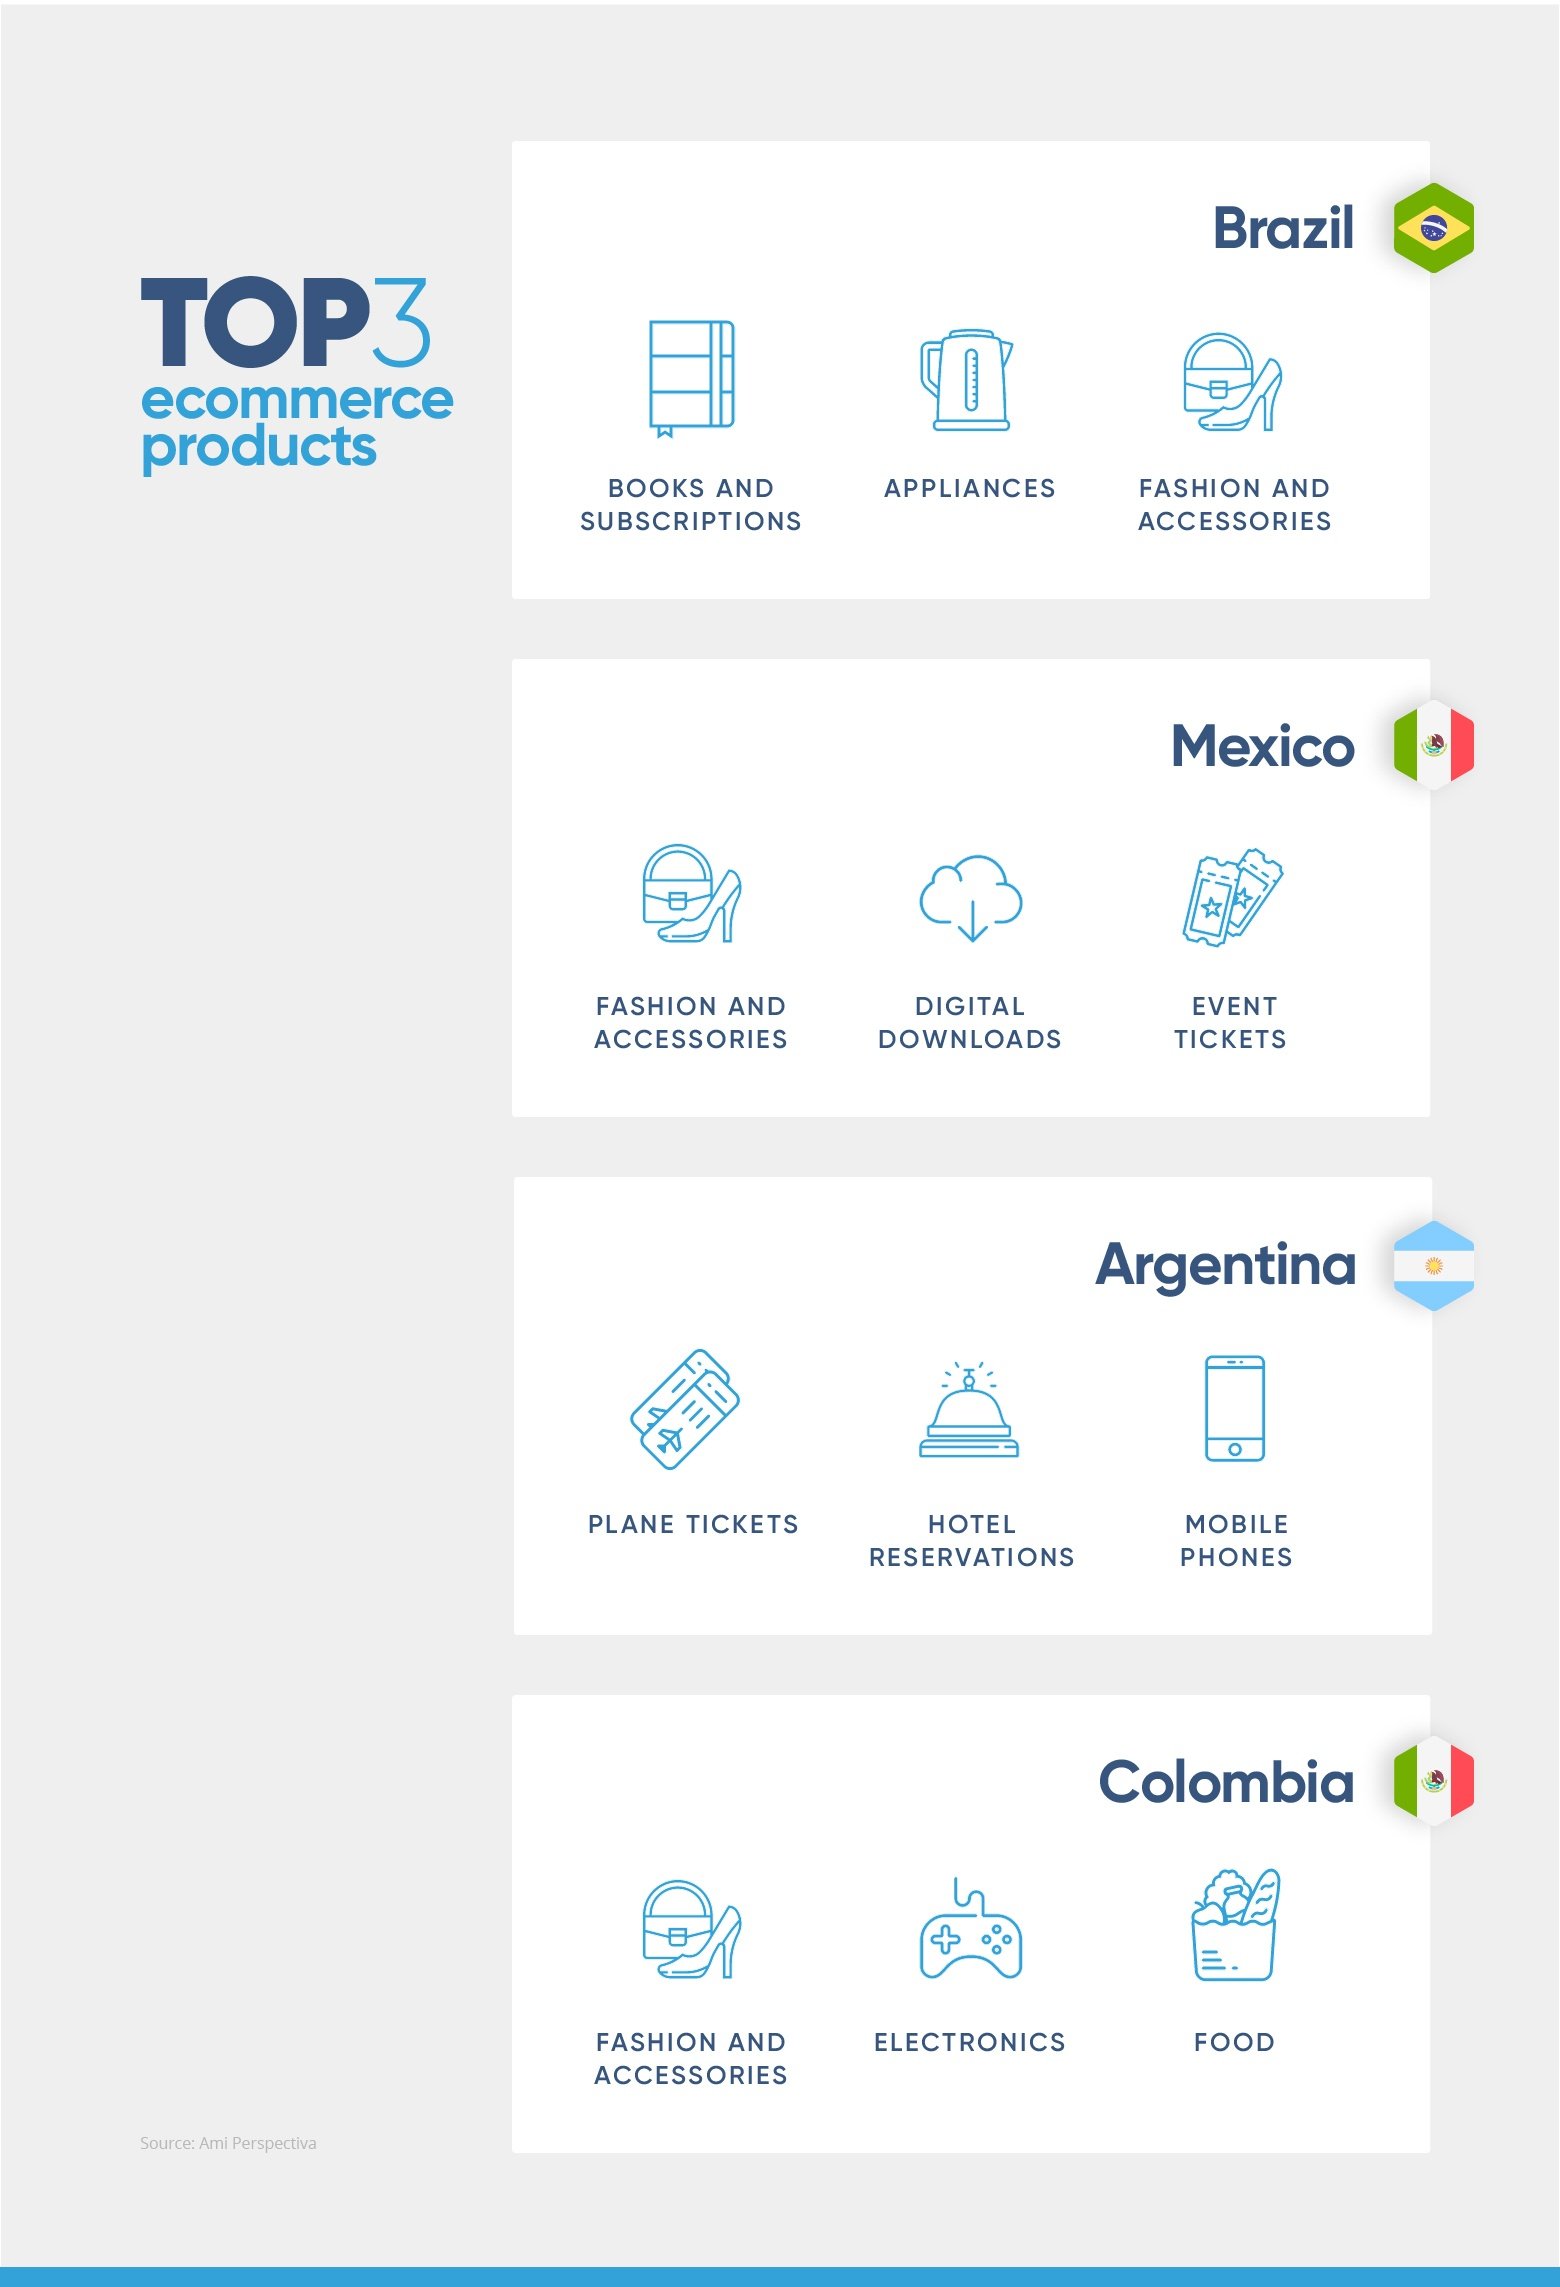 ecommerce-in-latin-america-top-3-ecommerce-products-2x.jpg